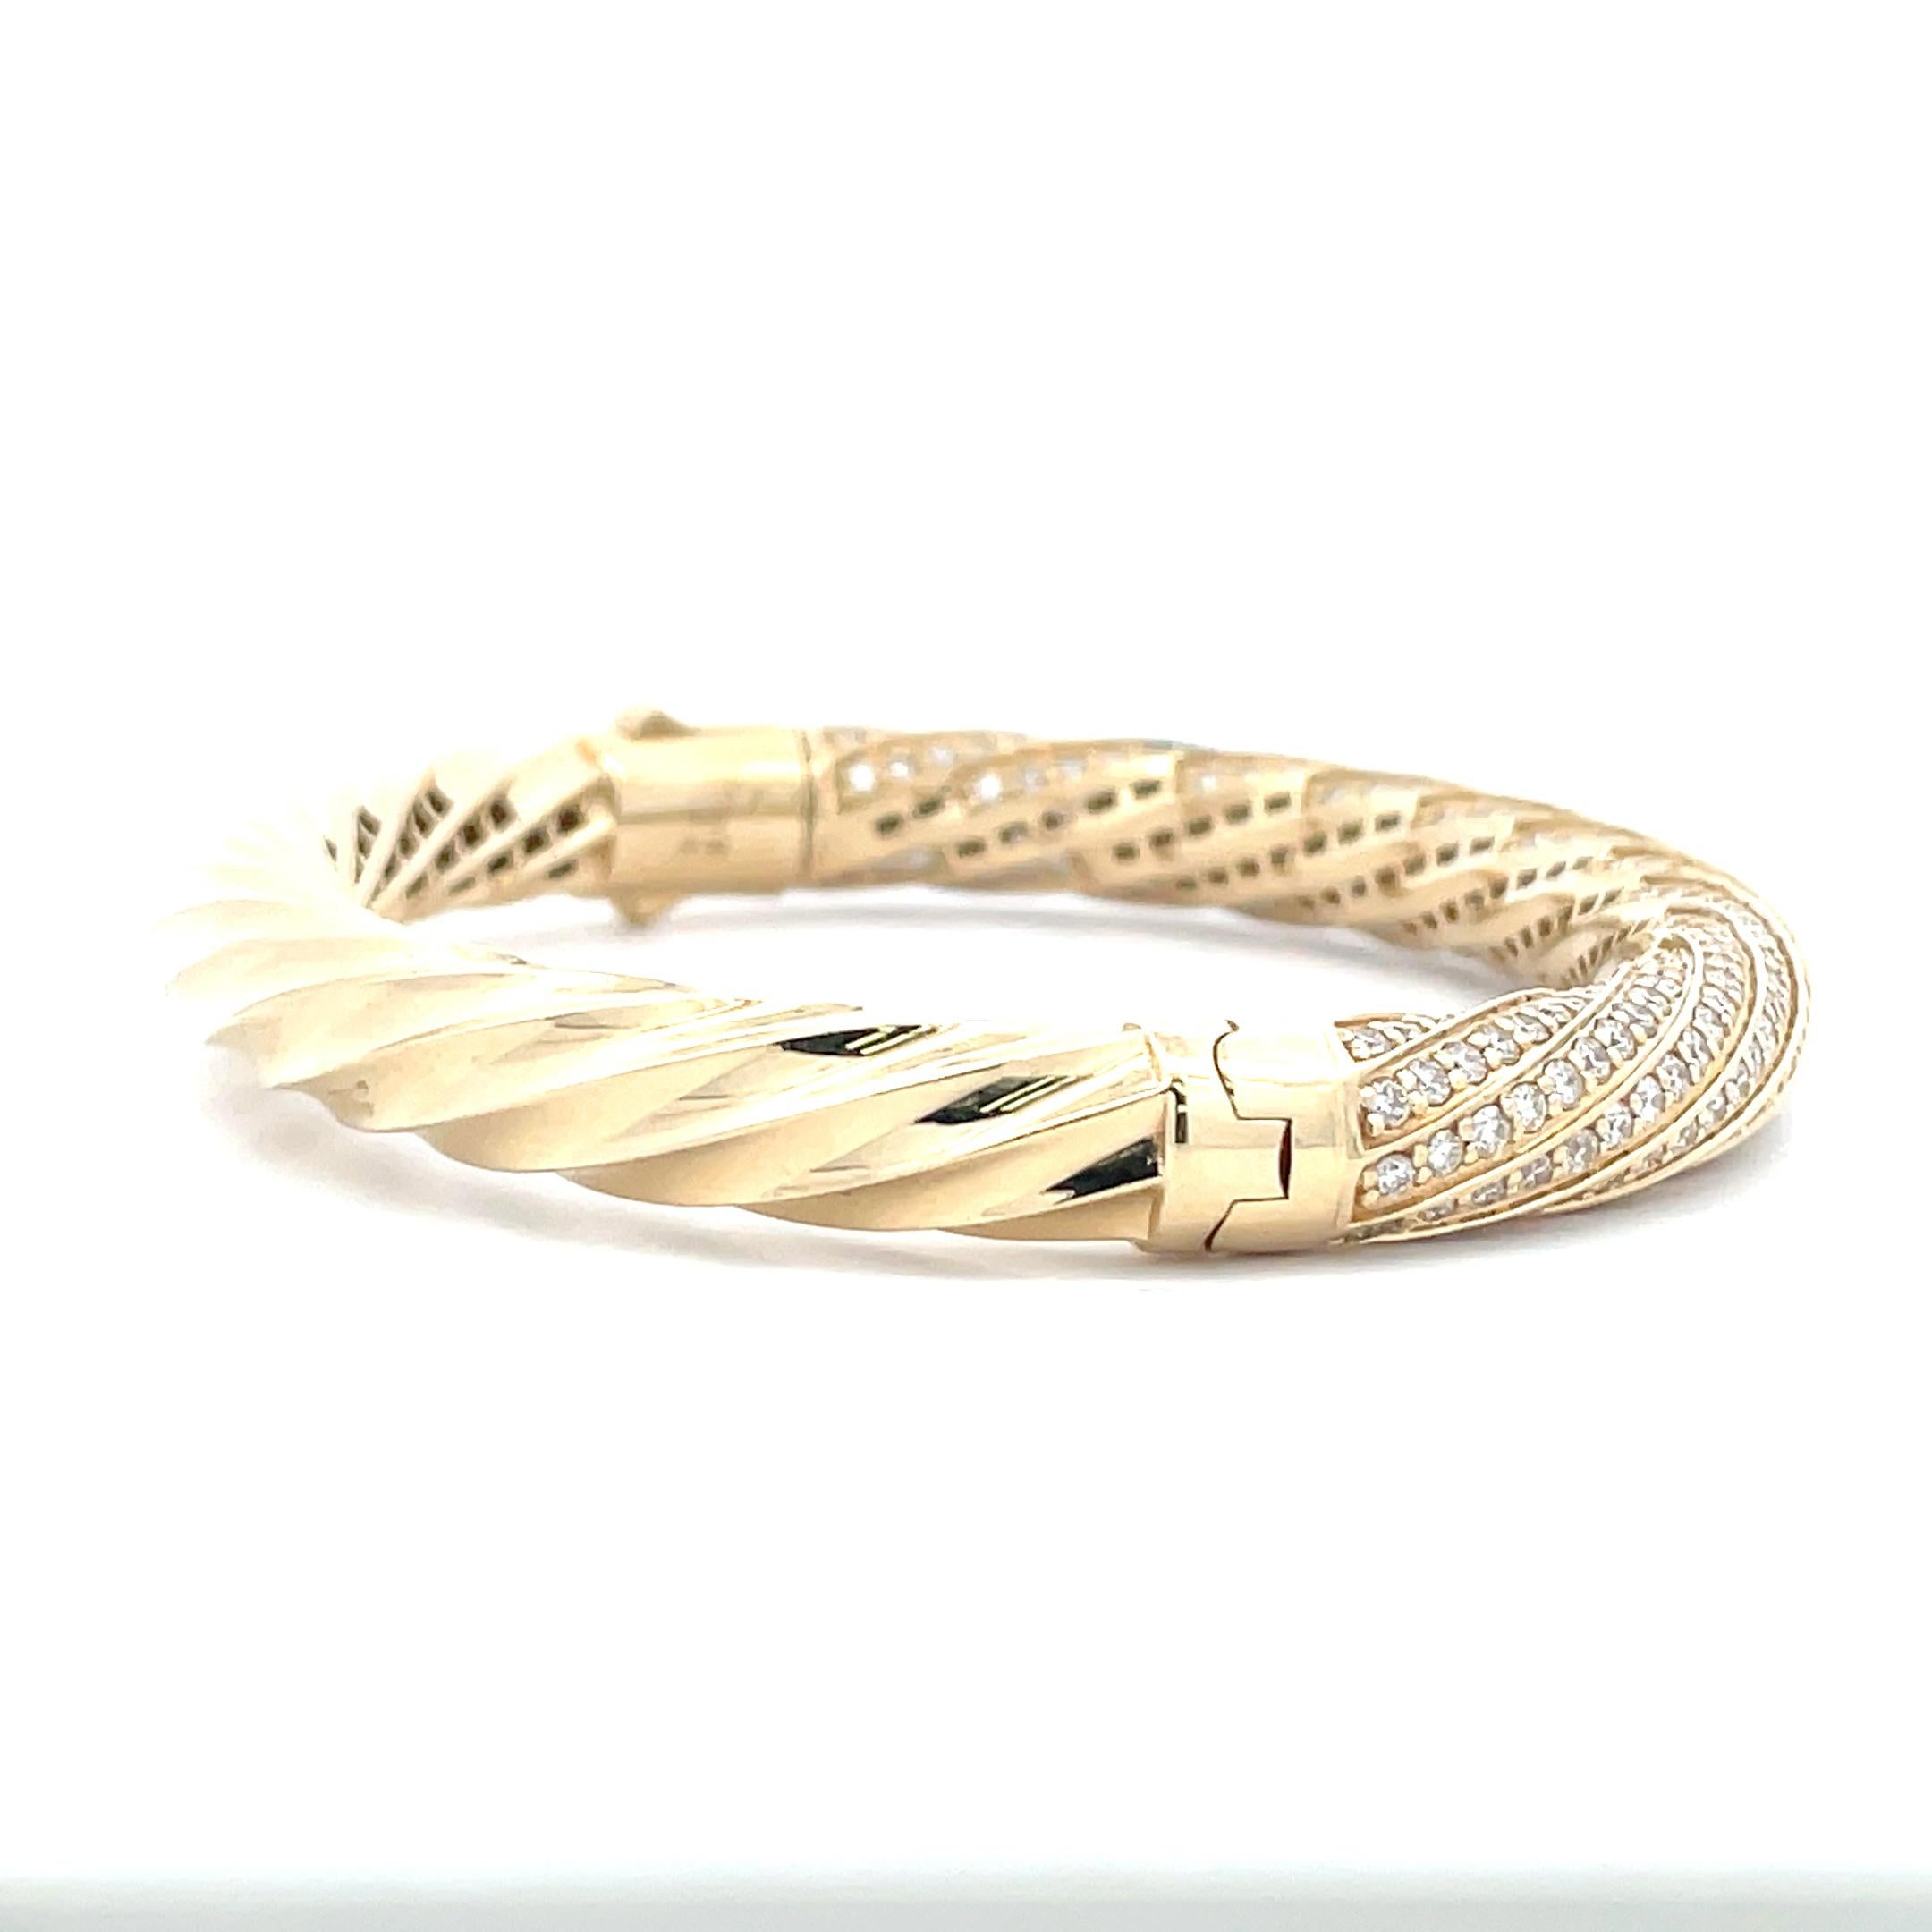 Diamond Cluster Sculpted Cable Bangle is a stylish and elegant way to show off your love of diamonds. Adorned with the vibrant sparkle of 5.74 ct. of diamonds, this unique bangle is the perfect way to add just a touch of flair to any outfit you